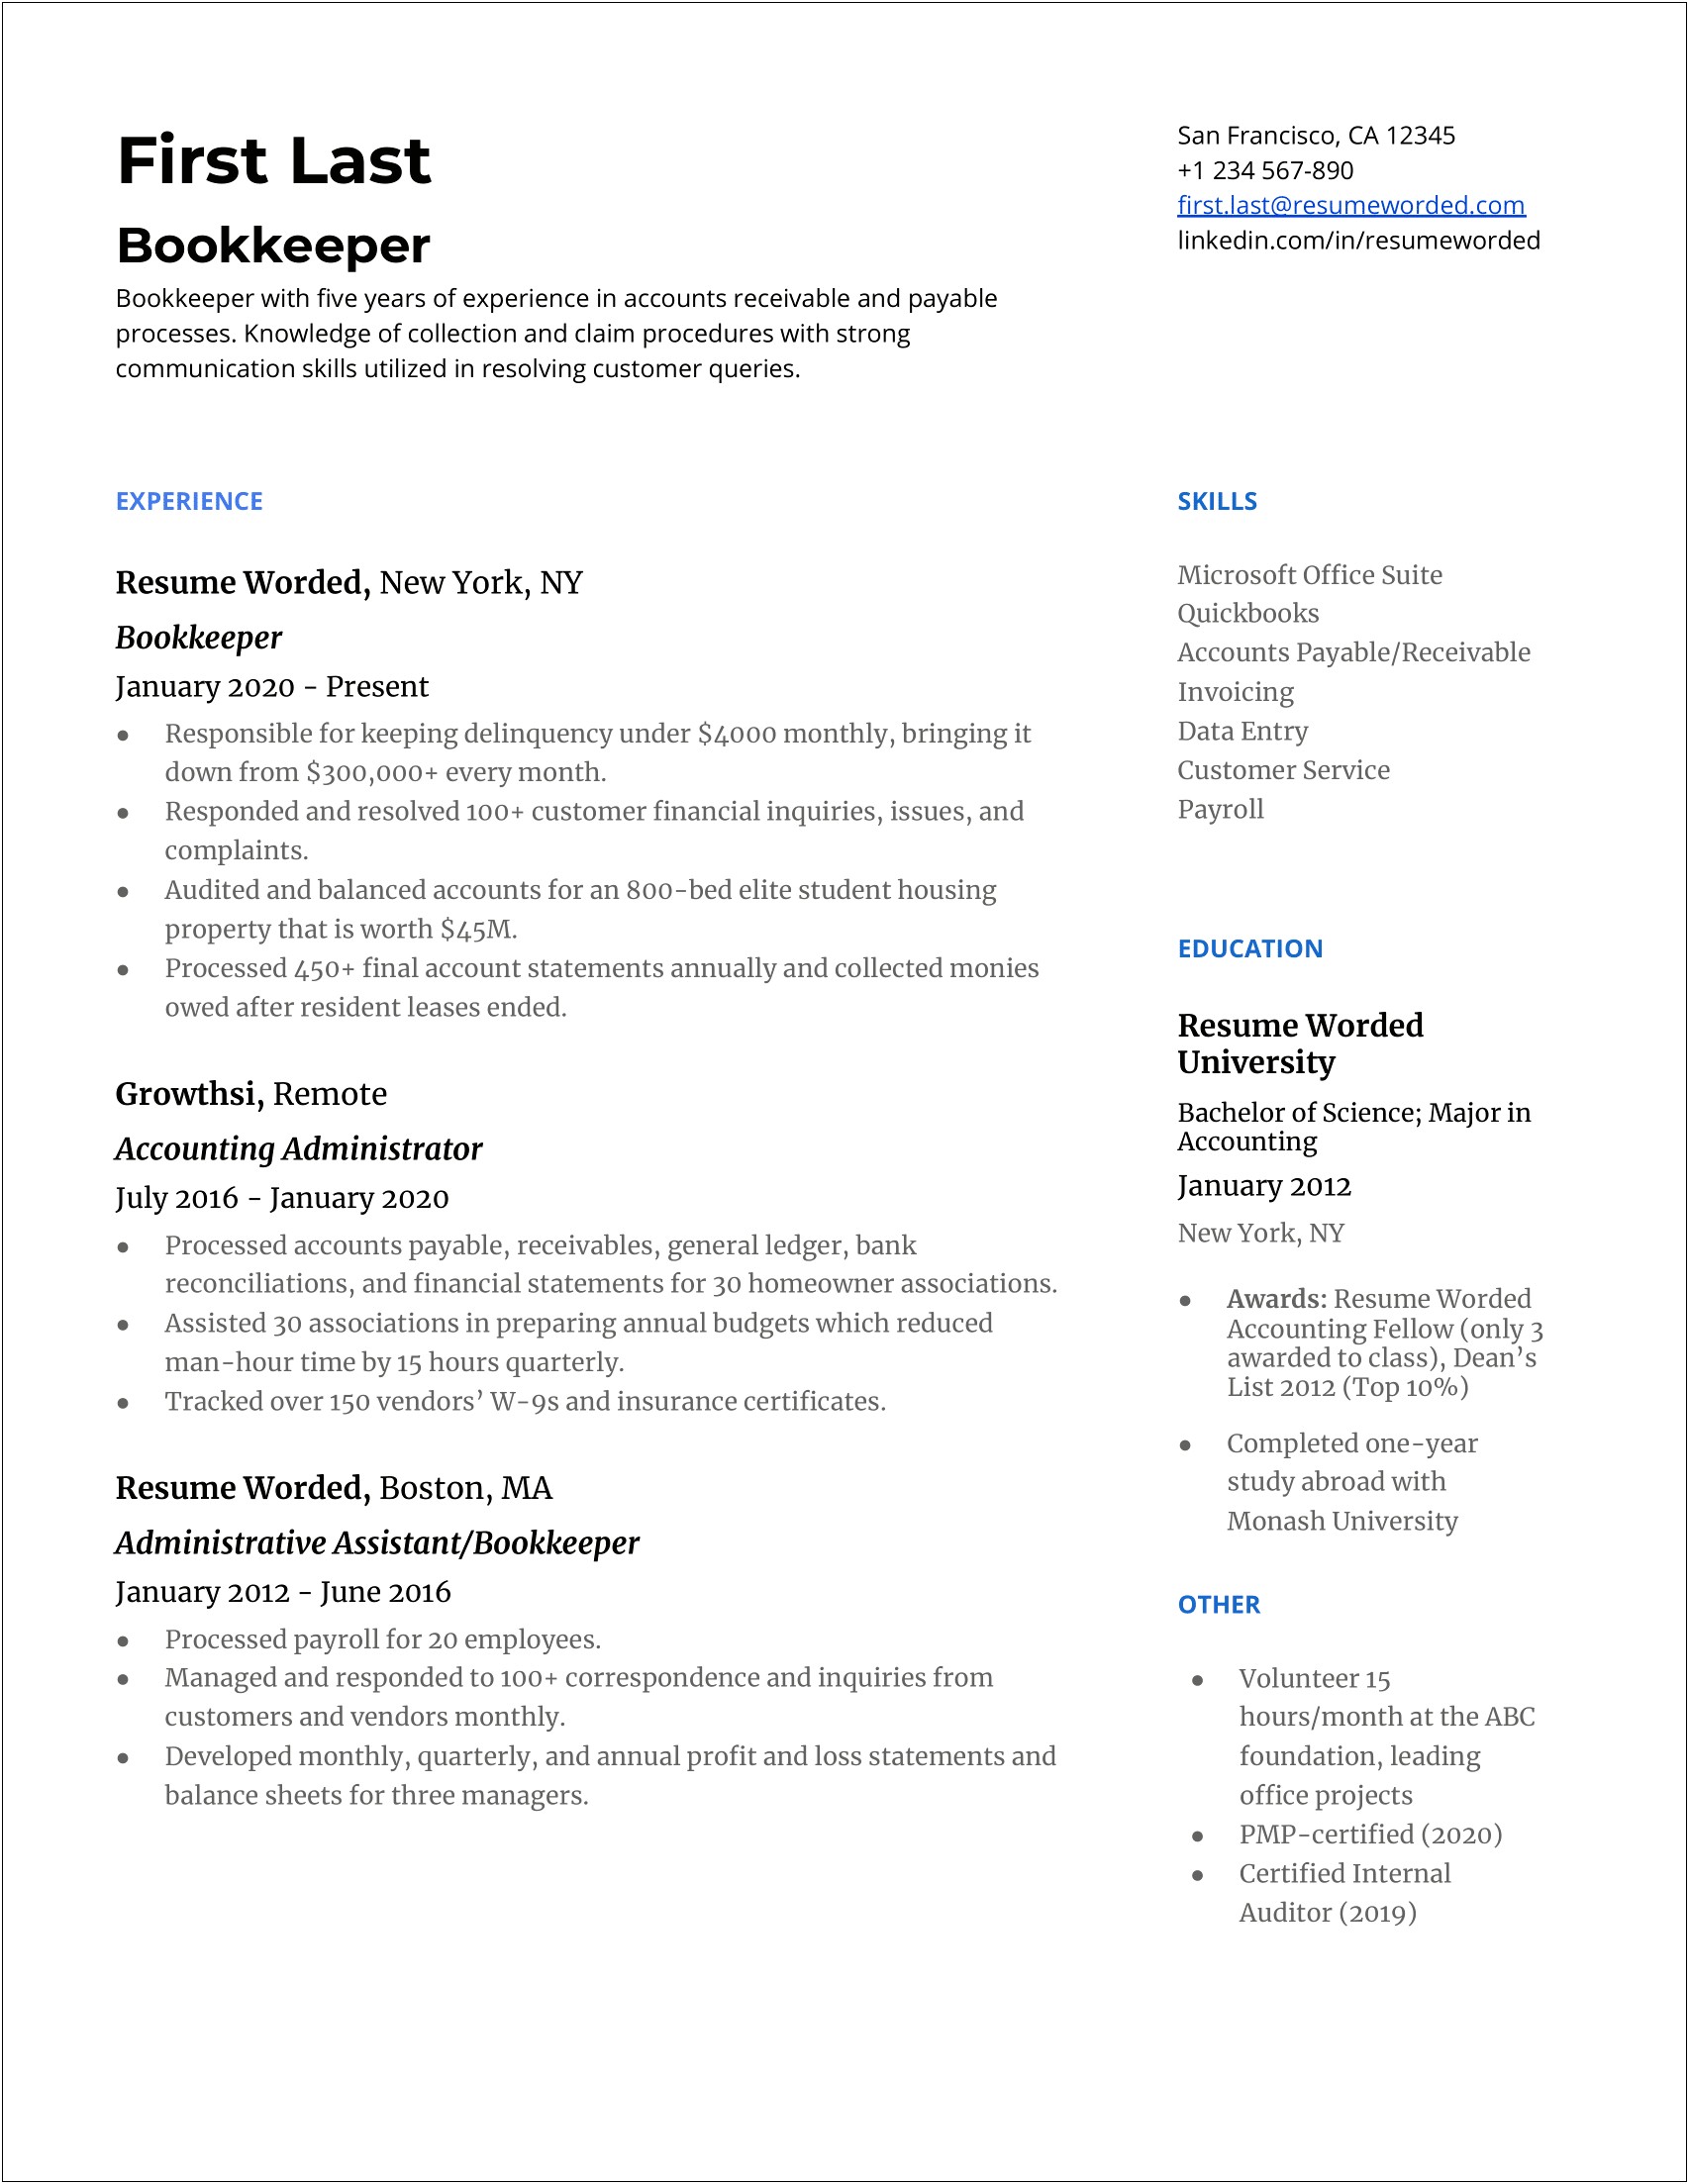 Resume Objective Statement Examples For Bookkeeping